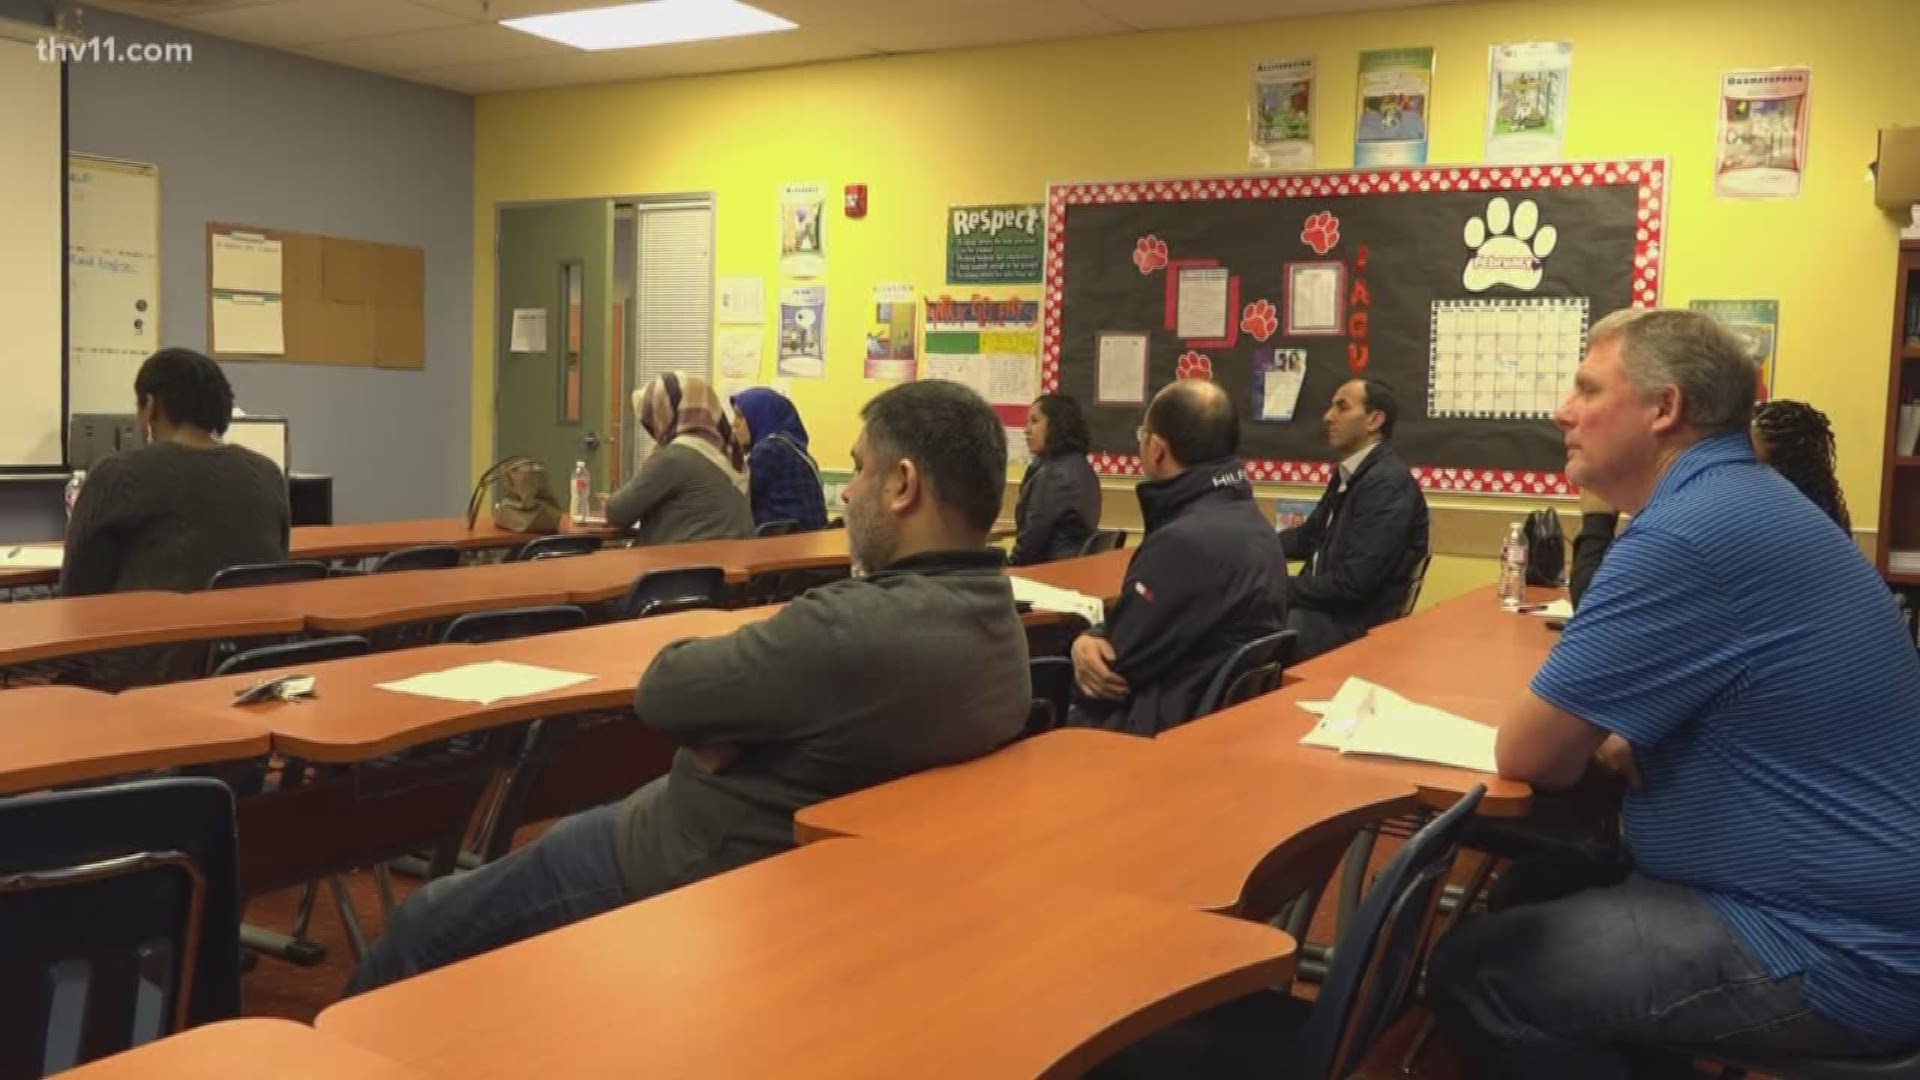 Lisa Acedemy hosted its first "Parent Academy" in response to the school shootings that have been happening. 